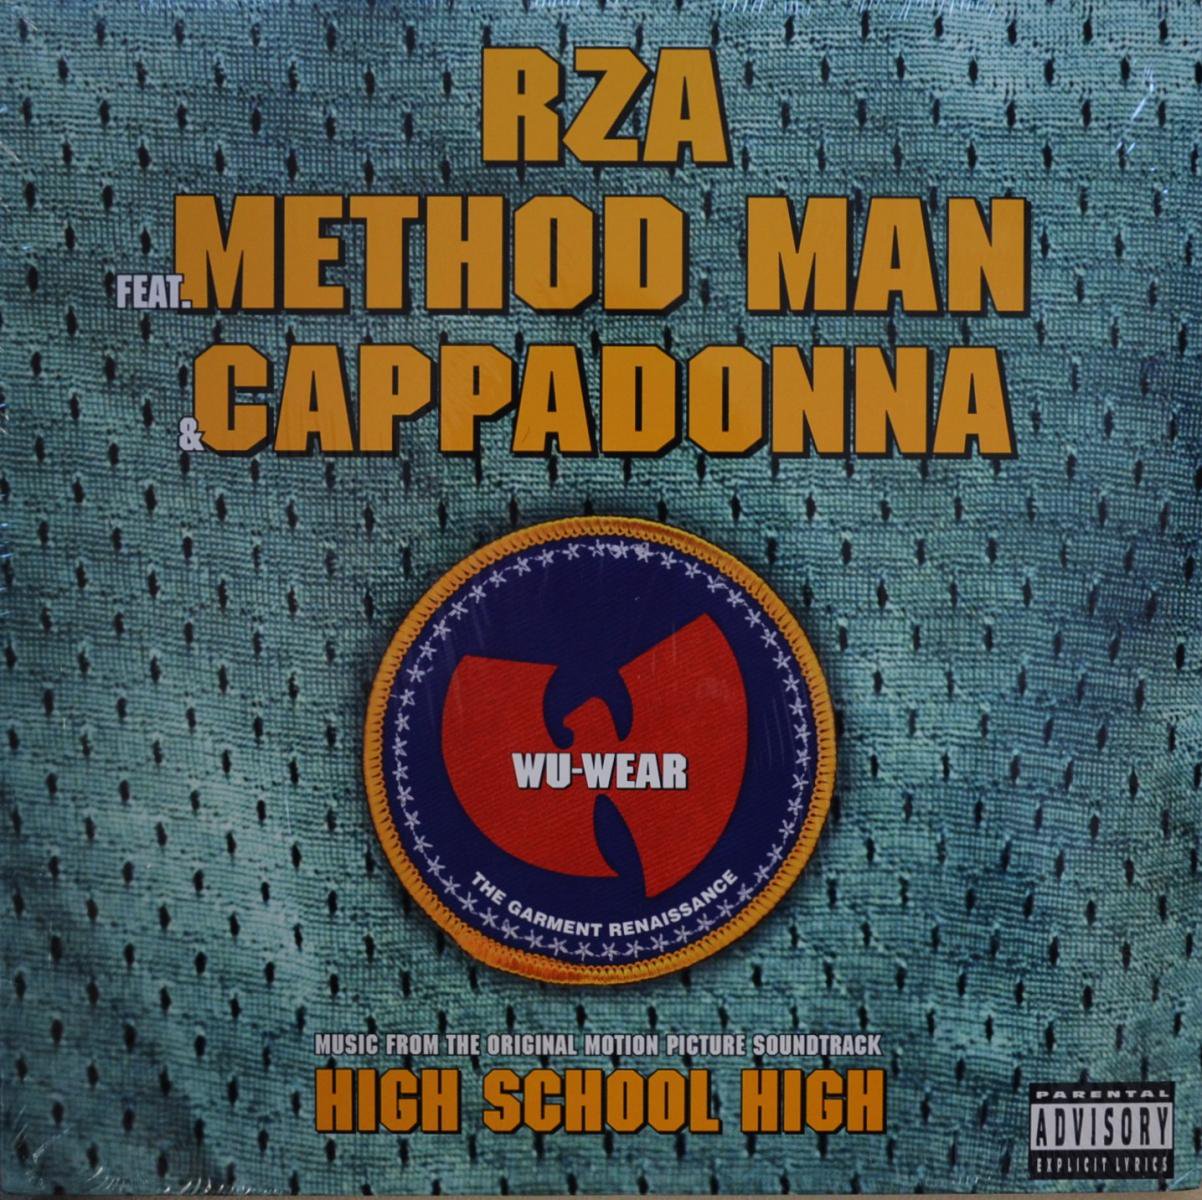 REAL LIVE / RZA - GET DOWN FOR MINE (PROD K-DEF) / WU-WEAR: THE GARMENT RENAISSANCE (12